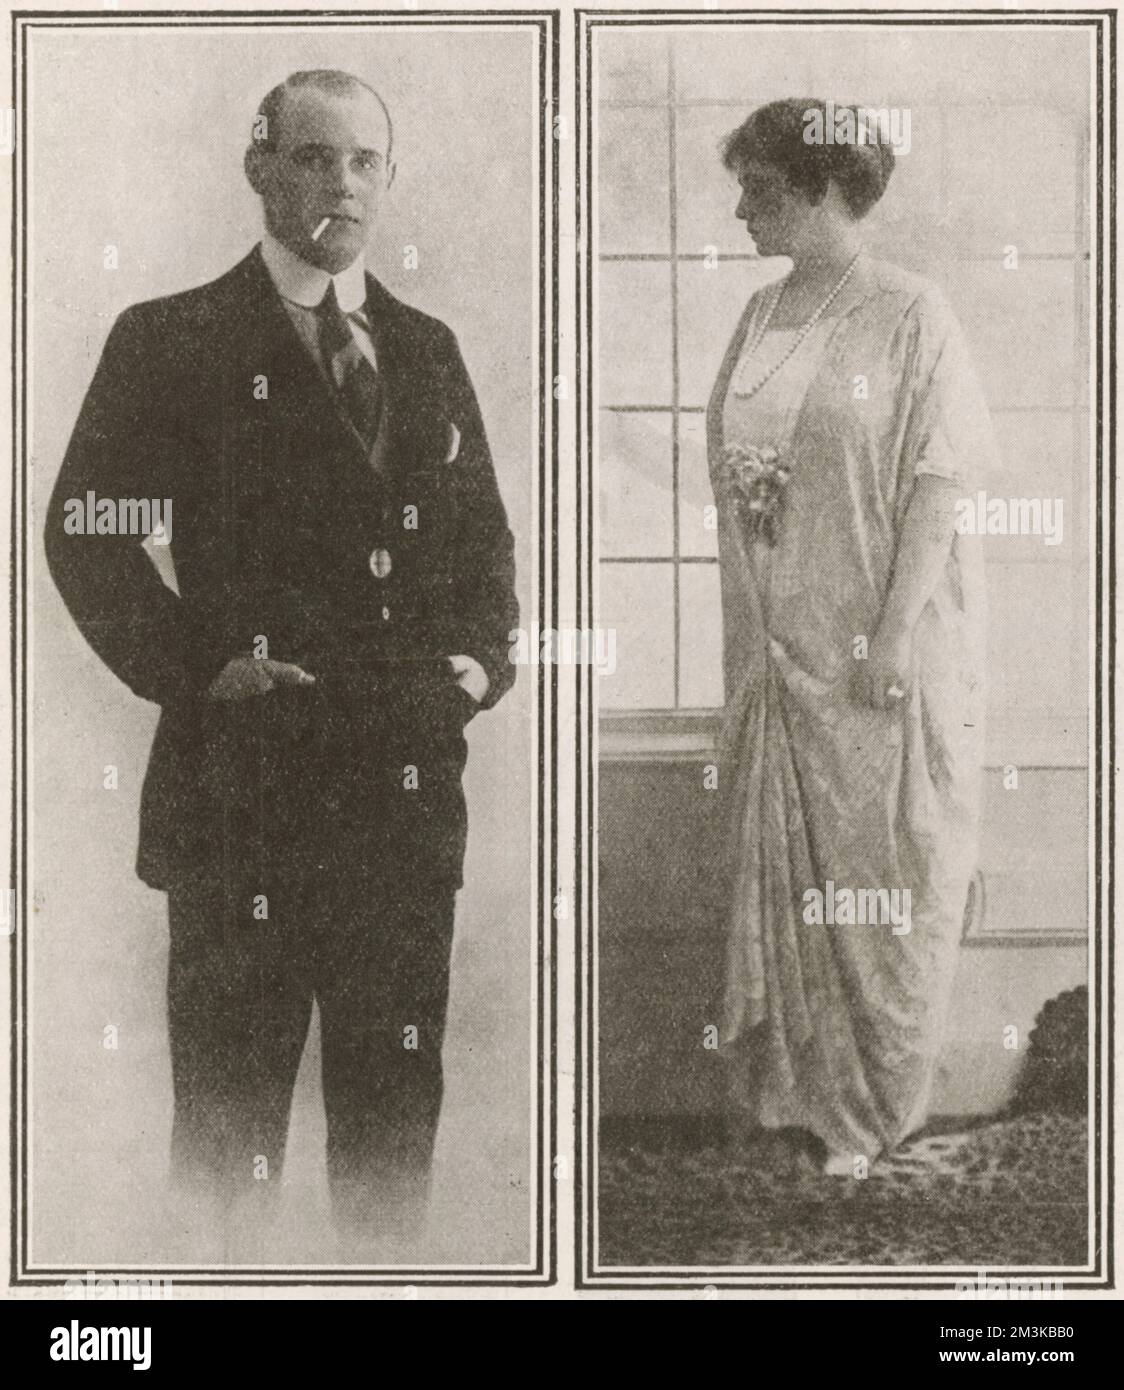 Photographs of Prince Christopher of Greece and his new wife, the twice-divorced American heiress Nancy Leeds. Princess Anastasia of Greece, as she was known after her marriage, formerly Mrs W.B. Leeds, born Nonnie May Stewart. Nancy came from a wealthy family and had previously married well twice before. Her marriage to Prince Christopher of Greece took place on 1 January 1920 in Switzerland after a long, six year engagement. Her fortune helped the Greek royal family during a particularly penurious period in their history, but she was to die of cancer just three years after her marriage. Stock Photo